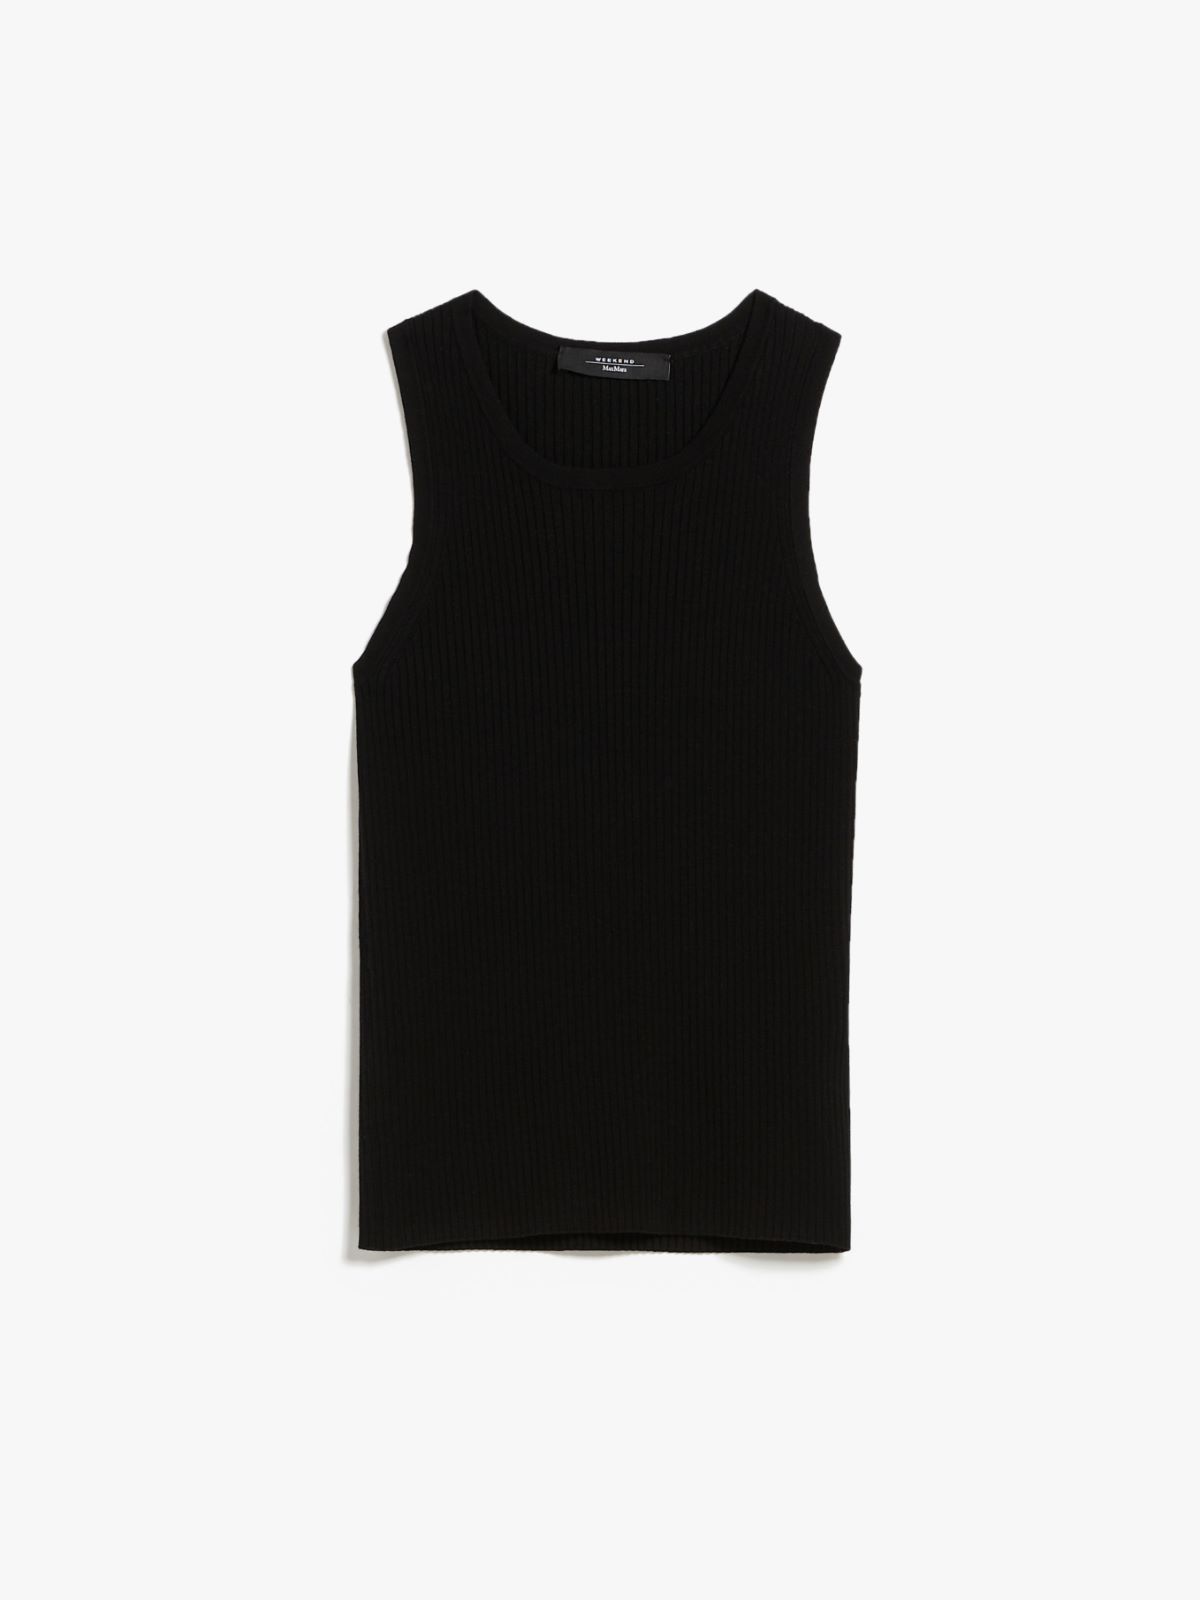 Ribbed top in stretch knit - BLACK - Weekend Max Mara - 6